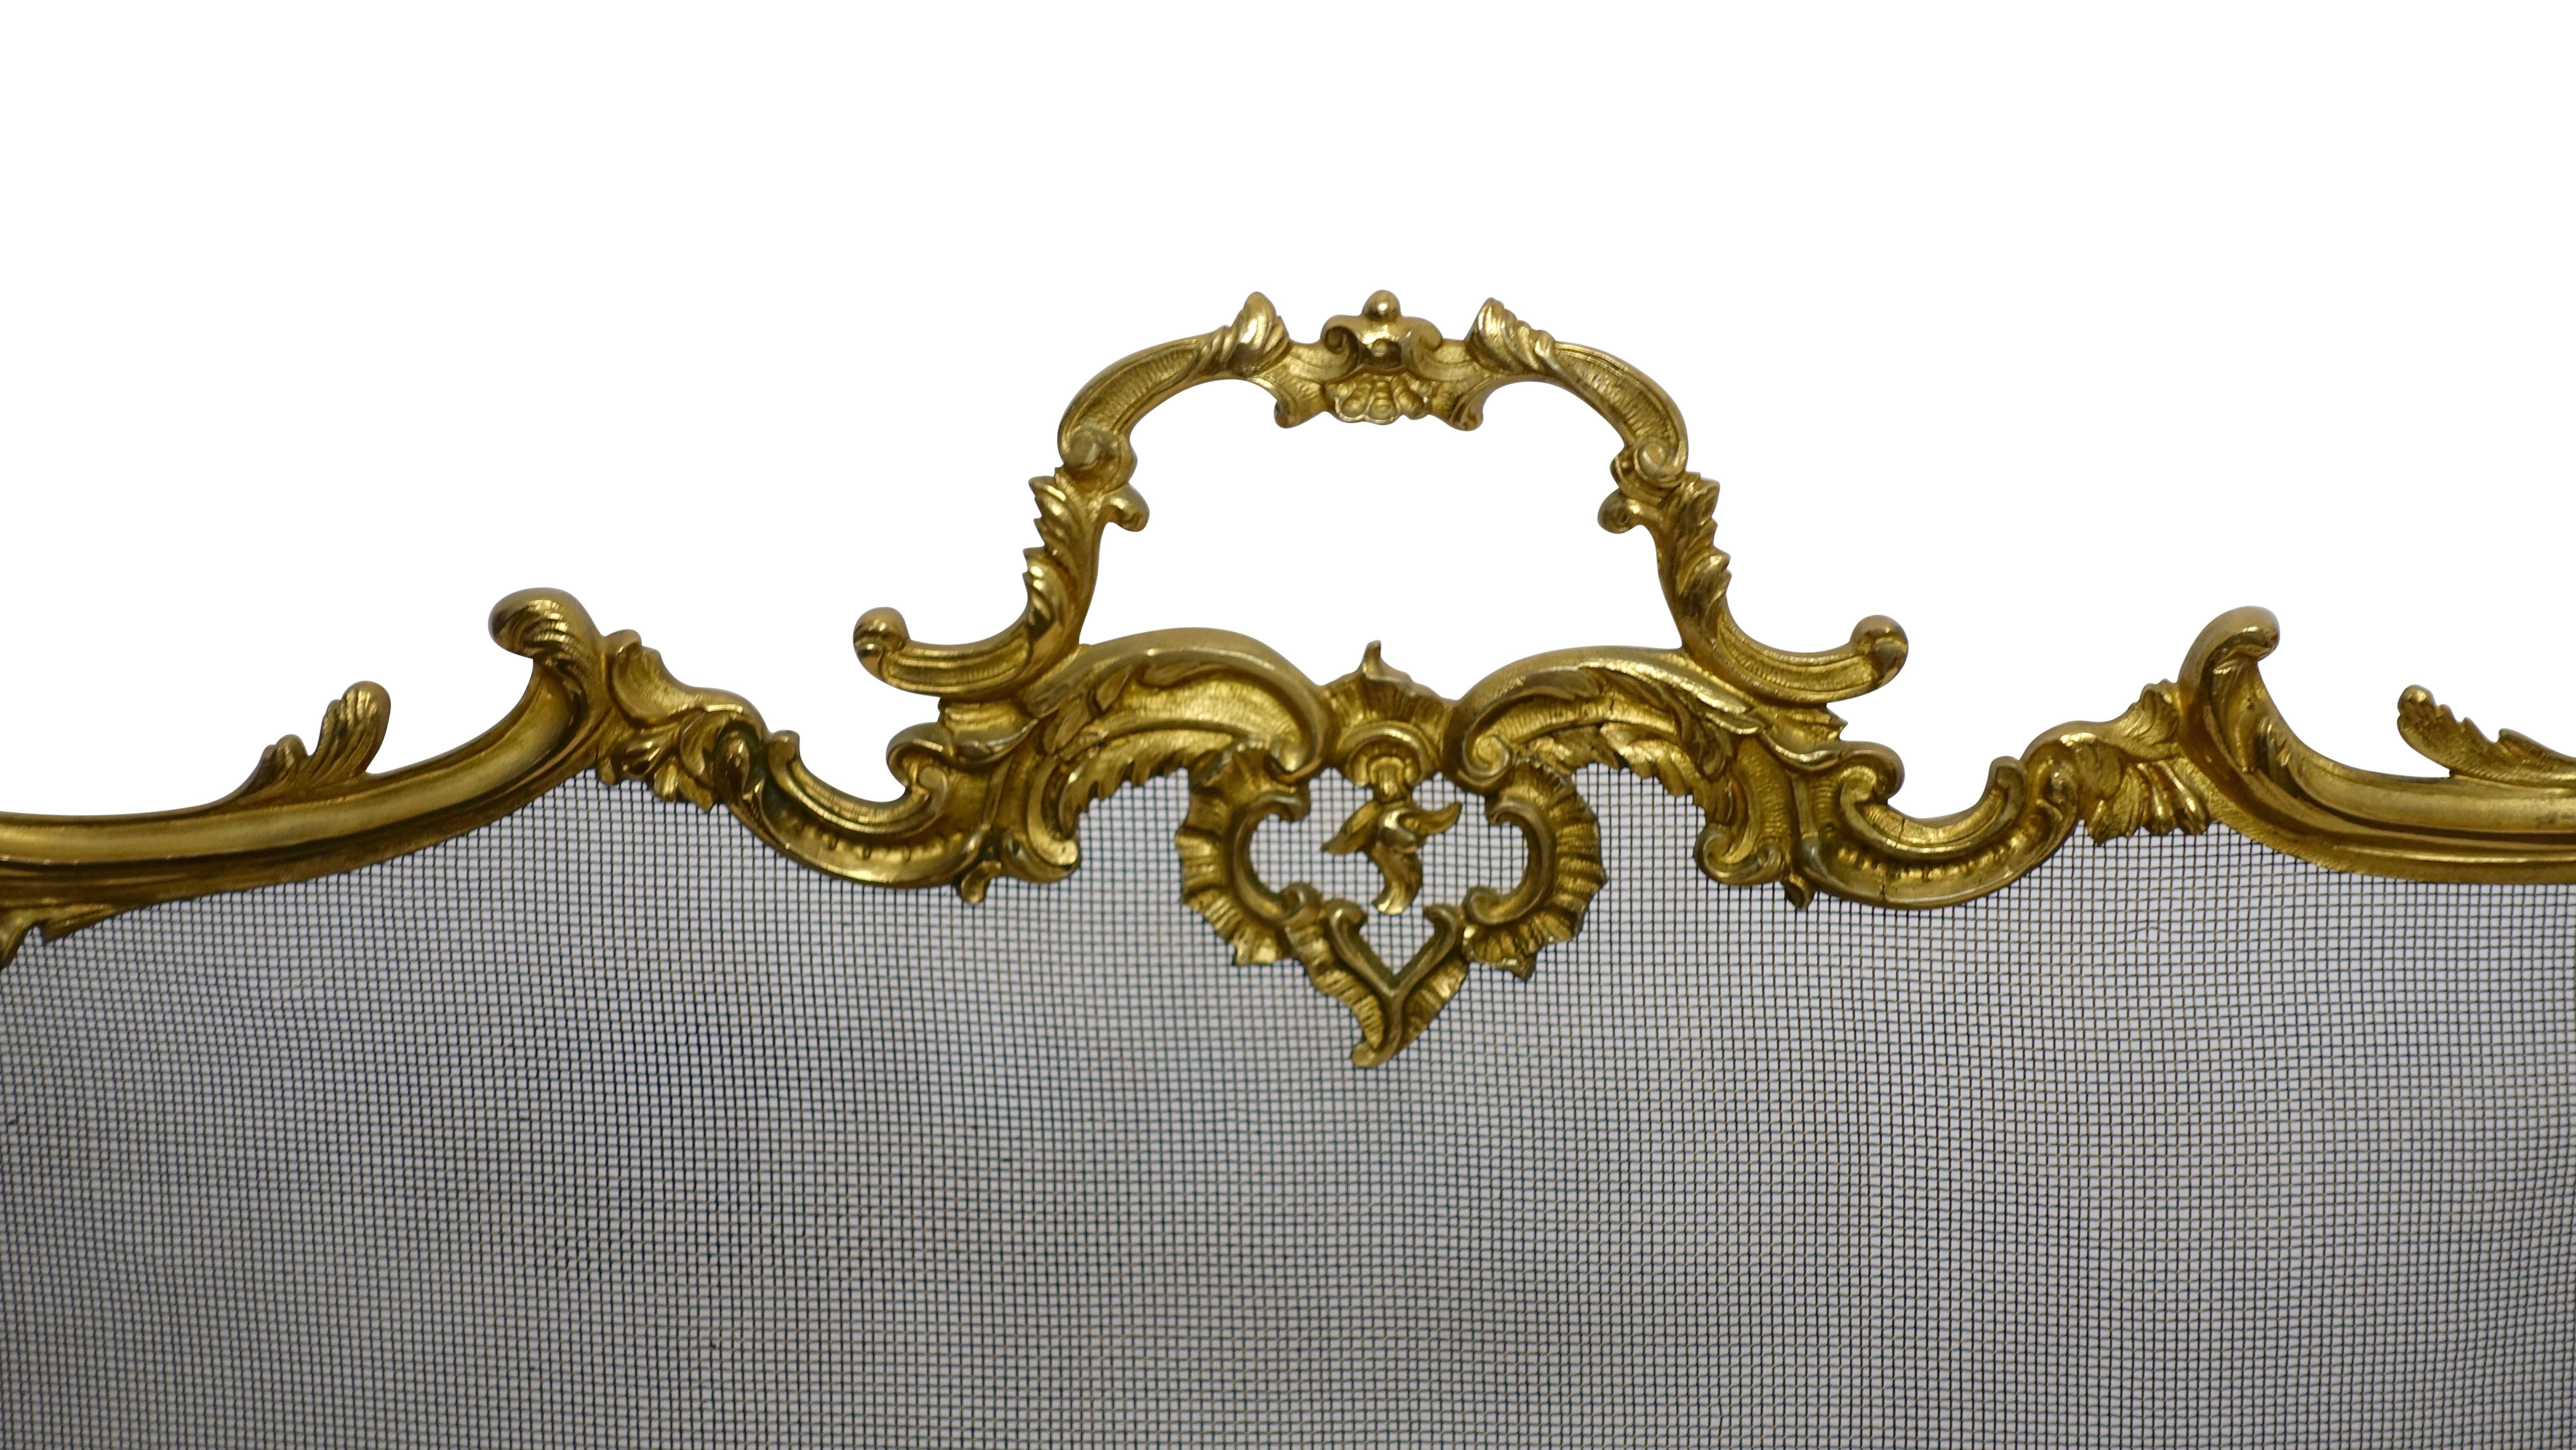 Fanciful gilt brass fireplace screen in the style of French Rococo, with C-scrolls, flowers shell shape pad feed, and a central medallion of overflowing flower basket, French, mid-20th century.